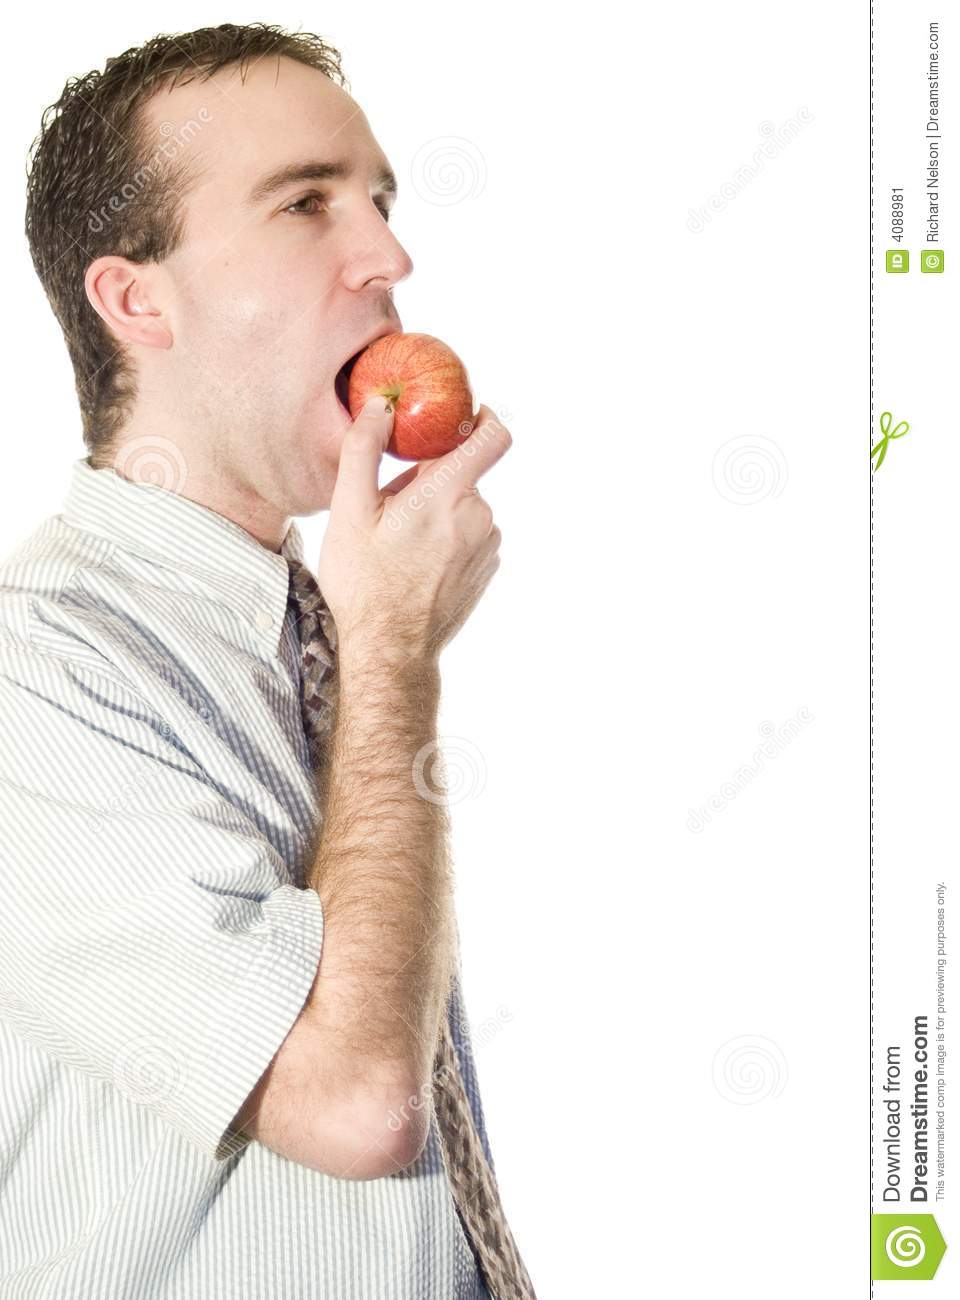 Lazy Worker Eating An Apple Instead Of Working 